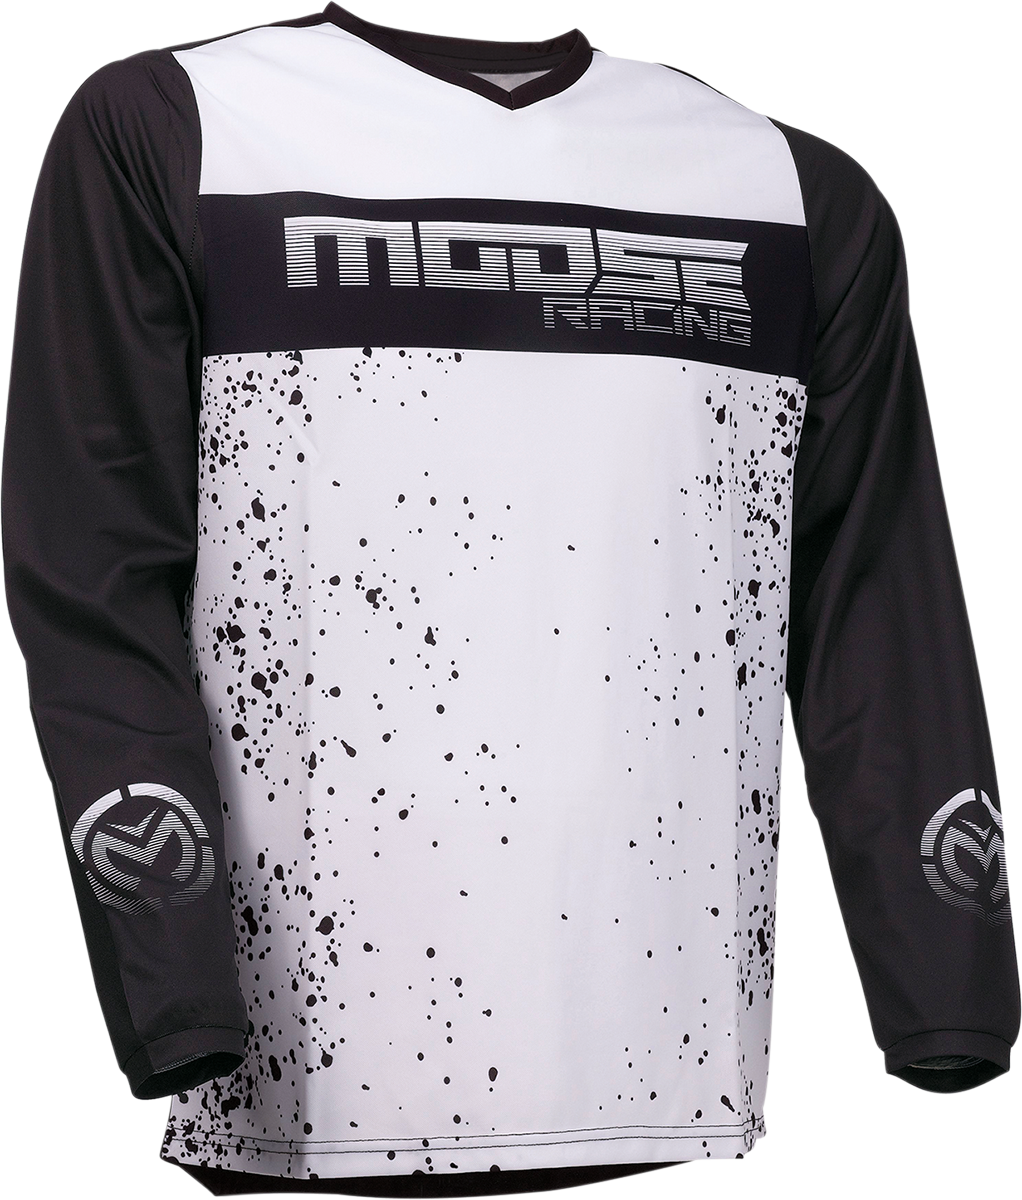 Qualifier™ Jersey - Black/White - Small